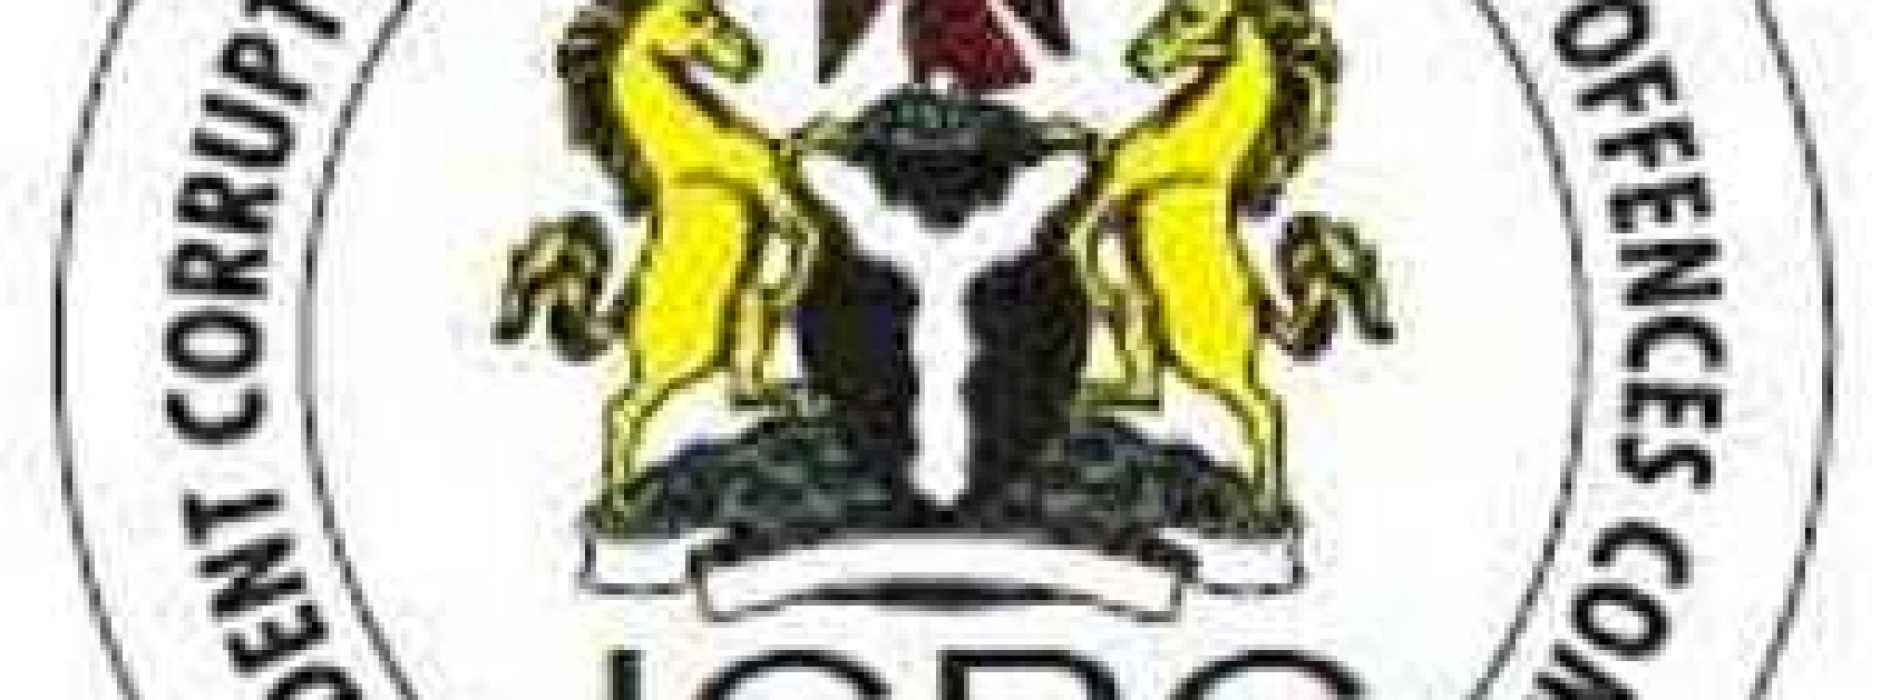 Alleged fake medical doctor docked by ICPC